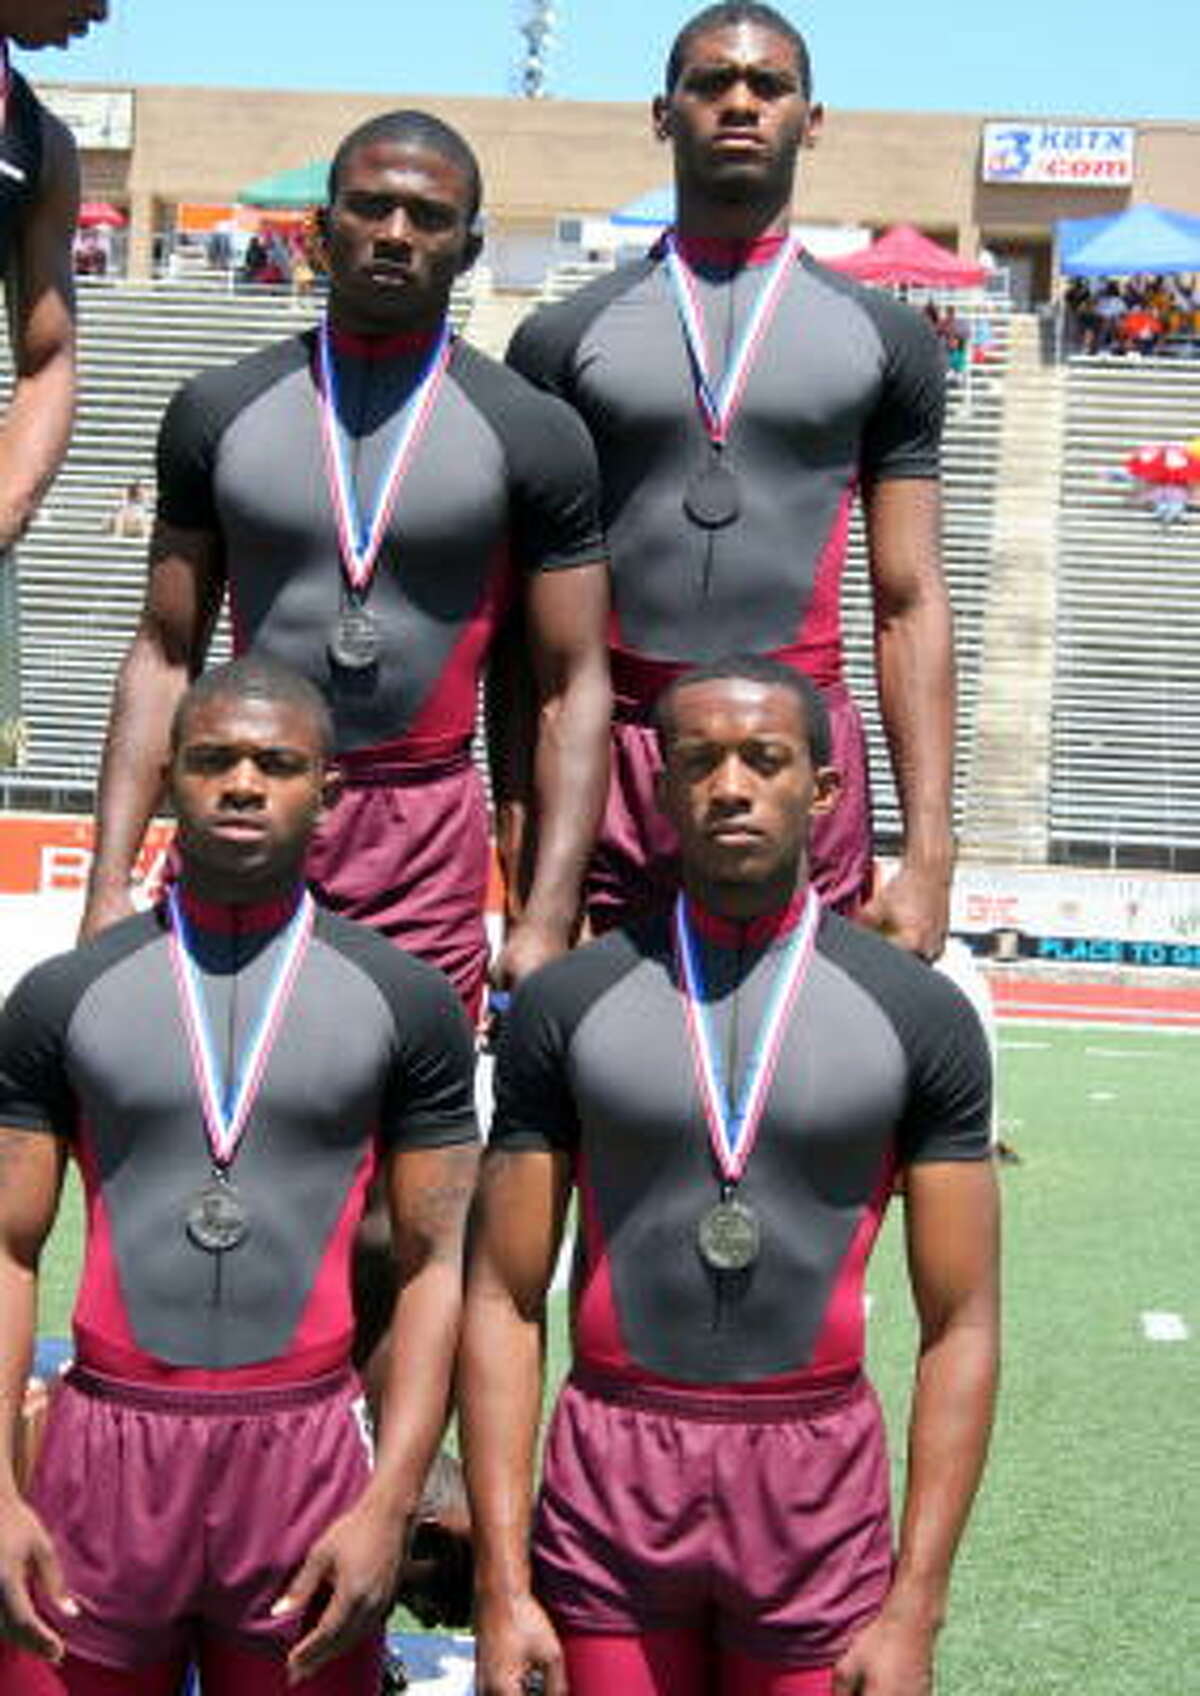 The boys of Beaumont Central took the silver medal in the 800-meter relay.